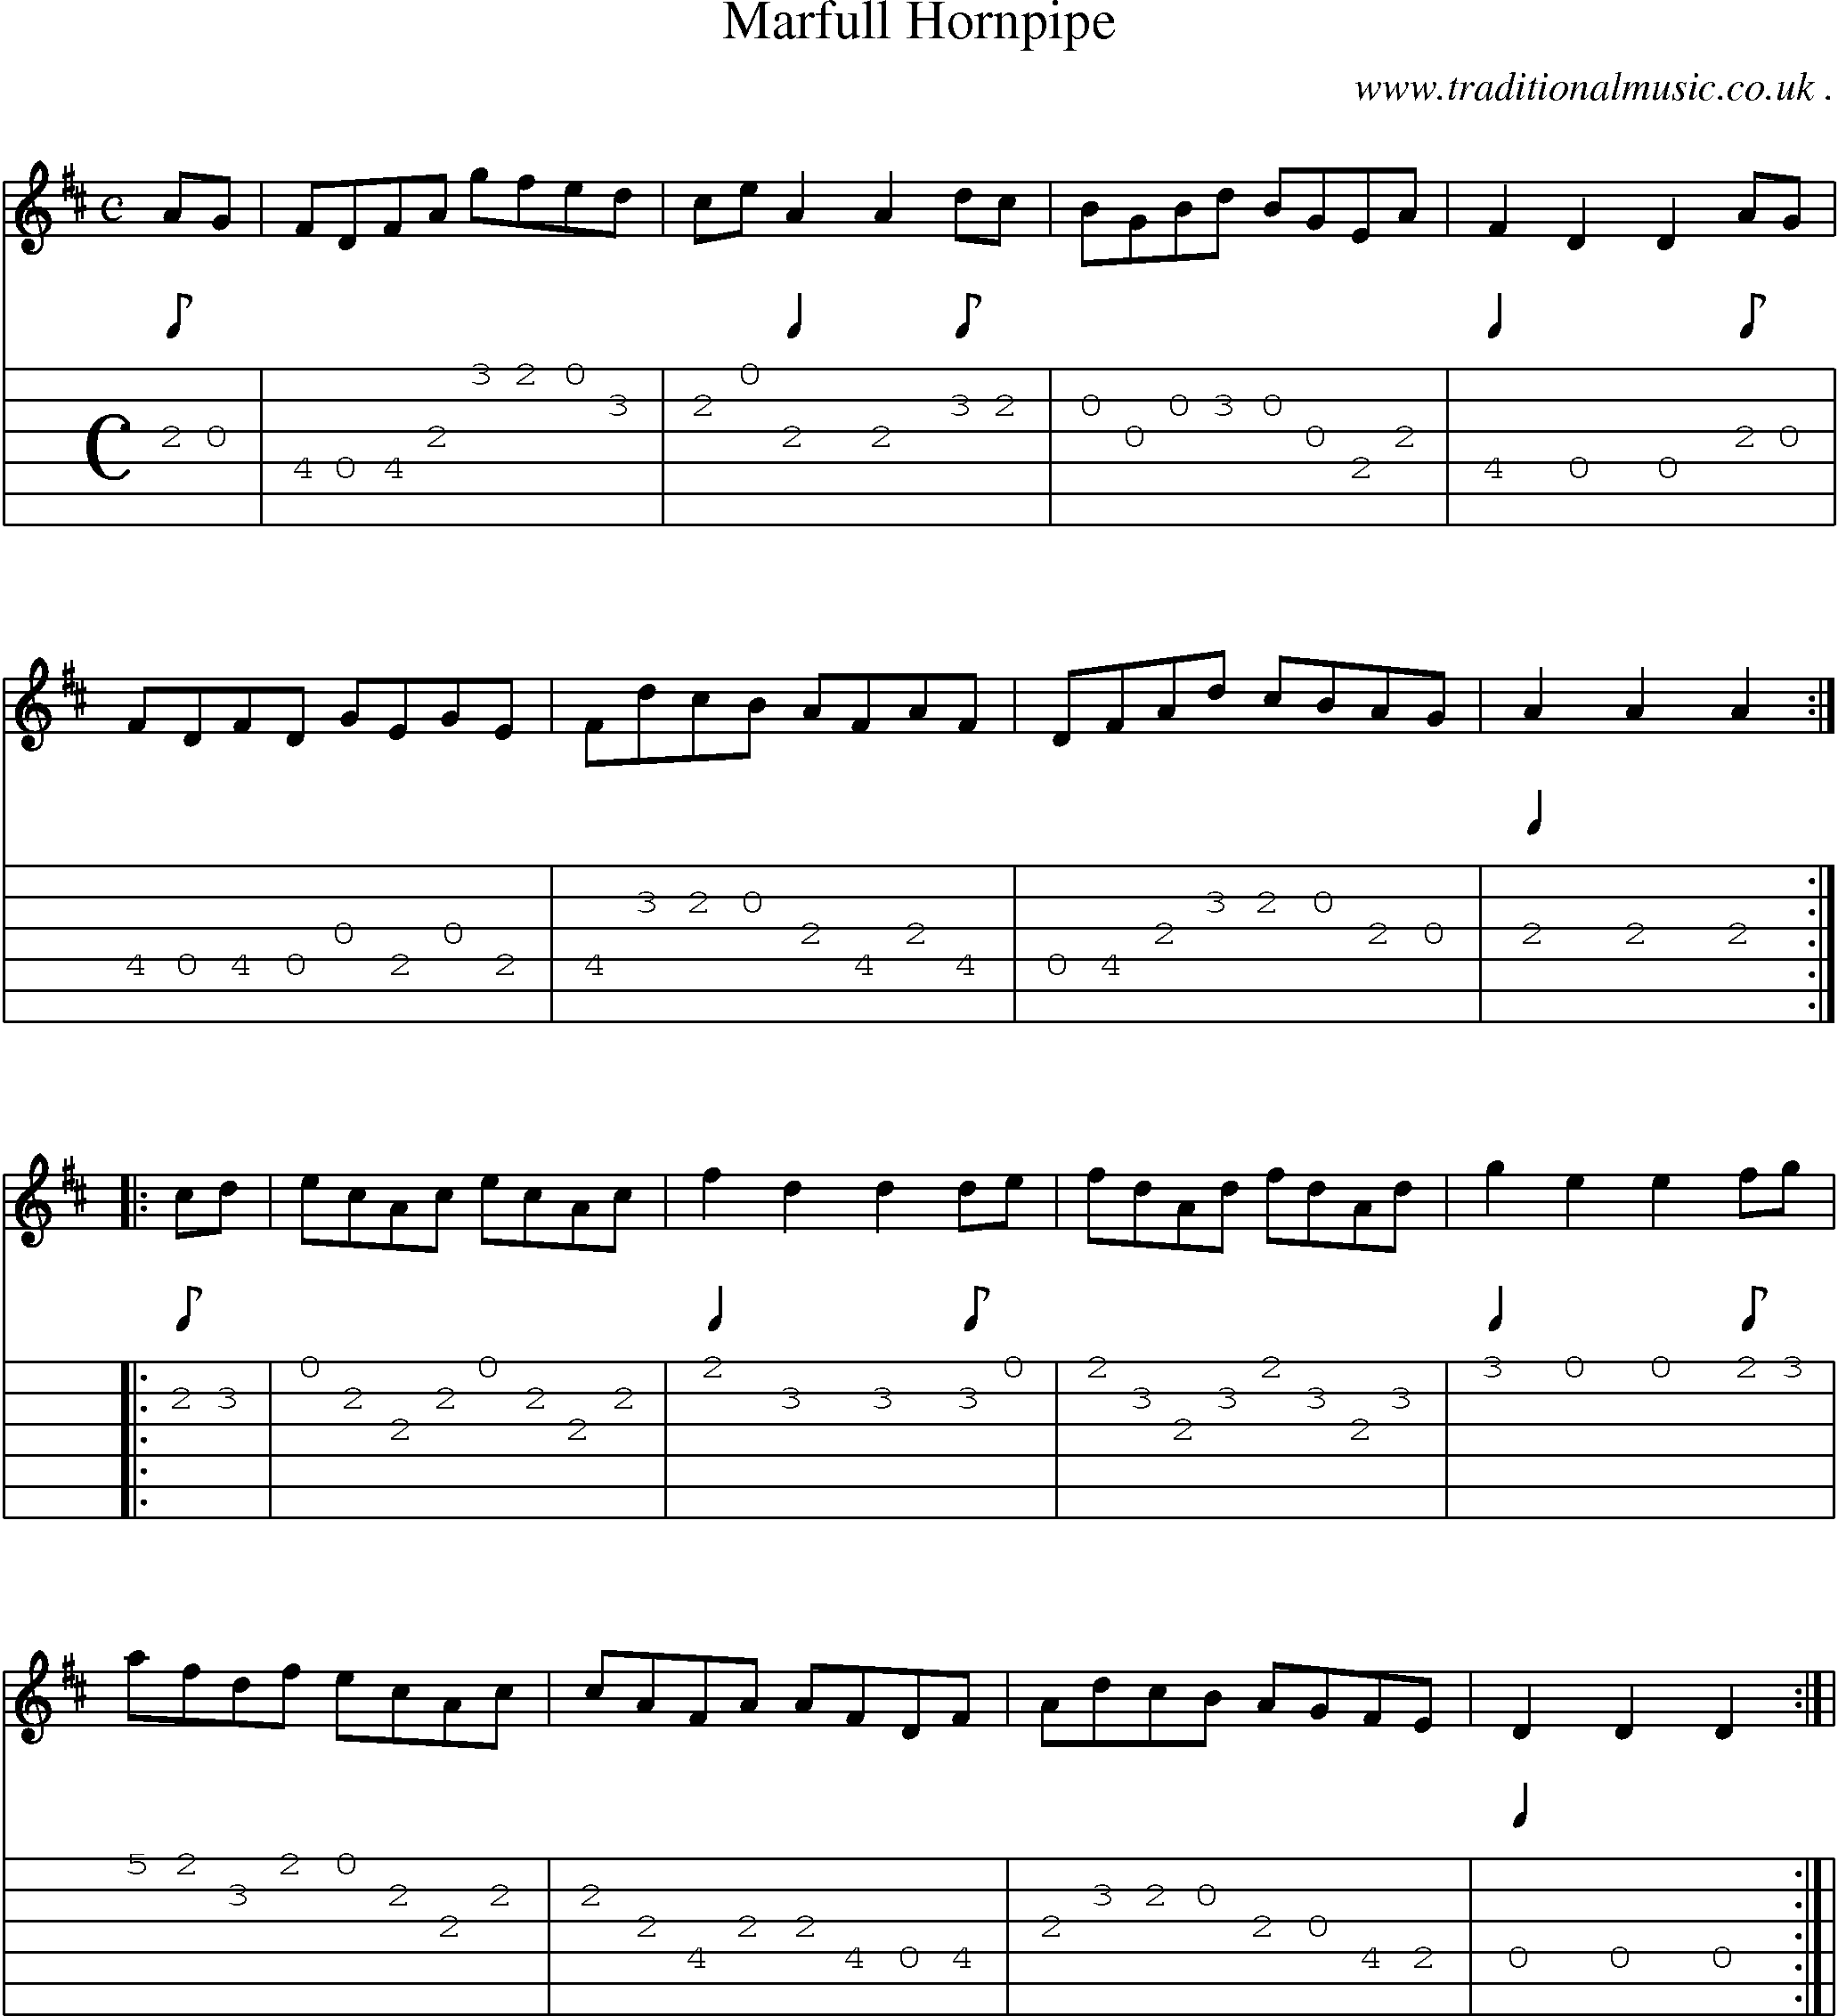 Sheet-Music and Guitar Tabs for Marfull Hornpipe